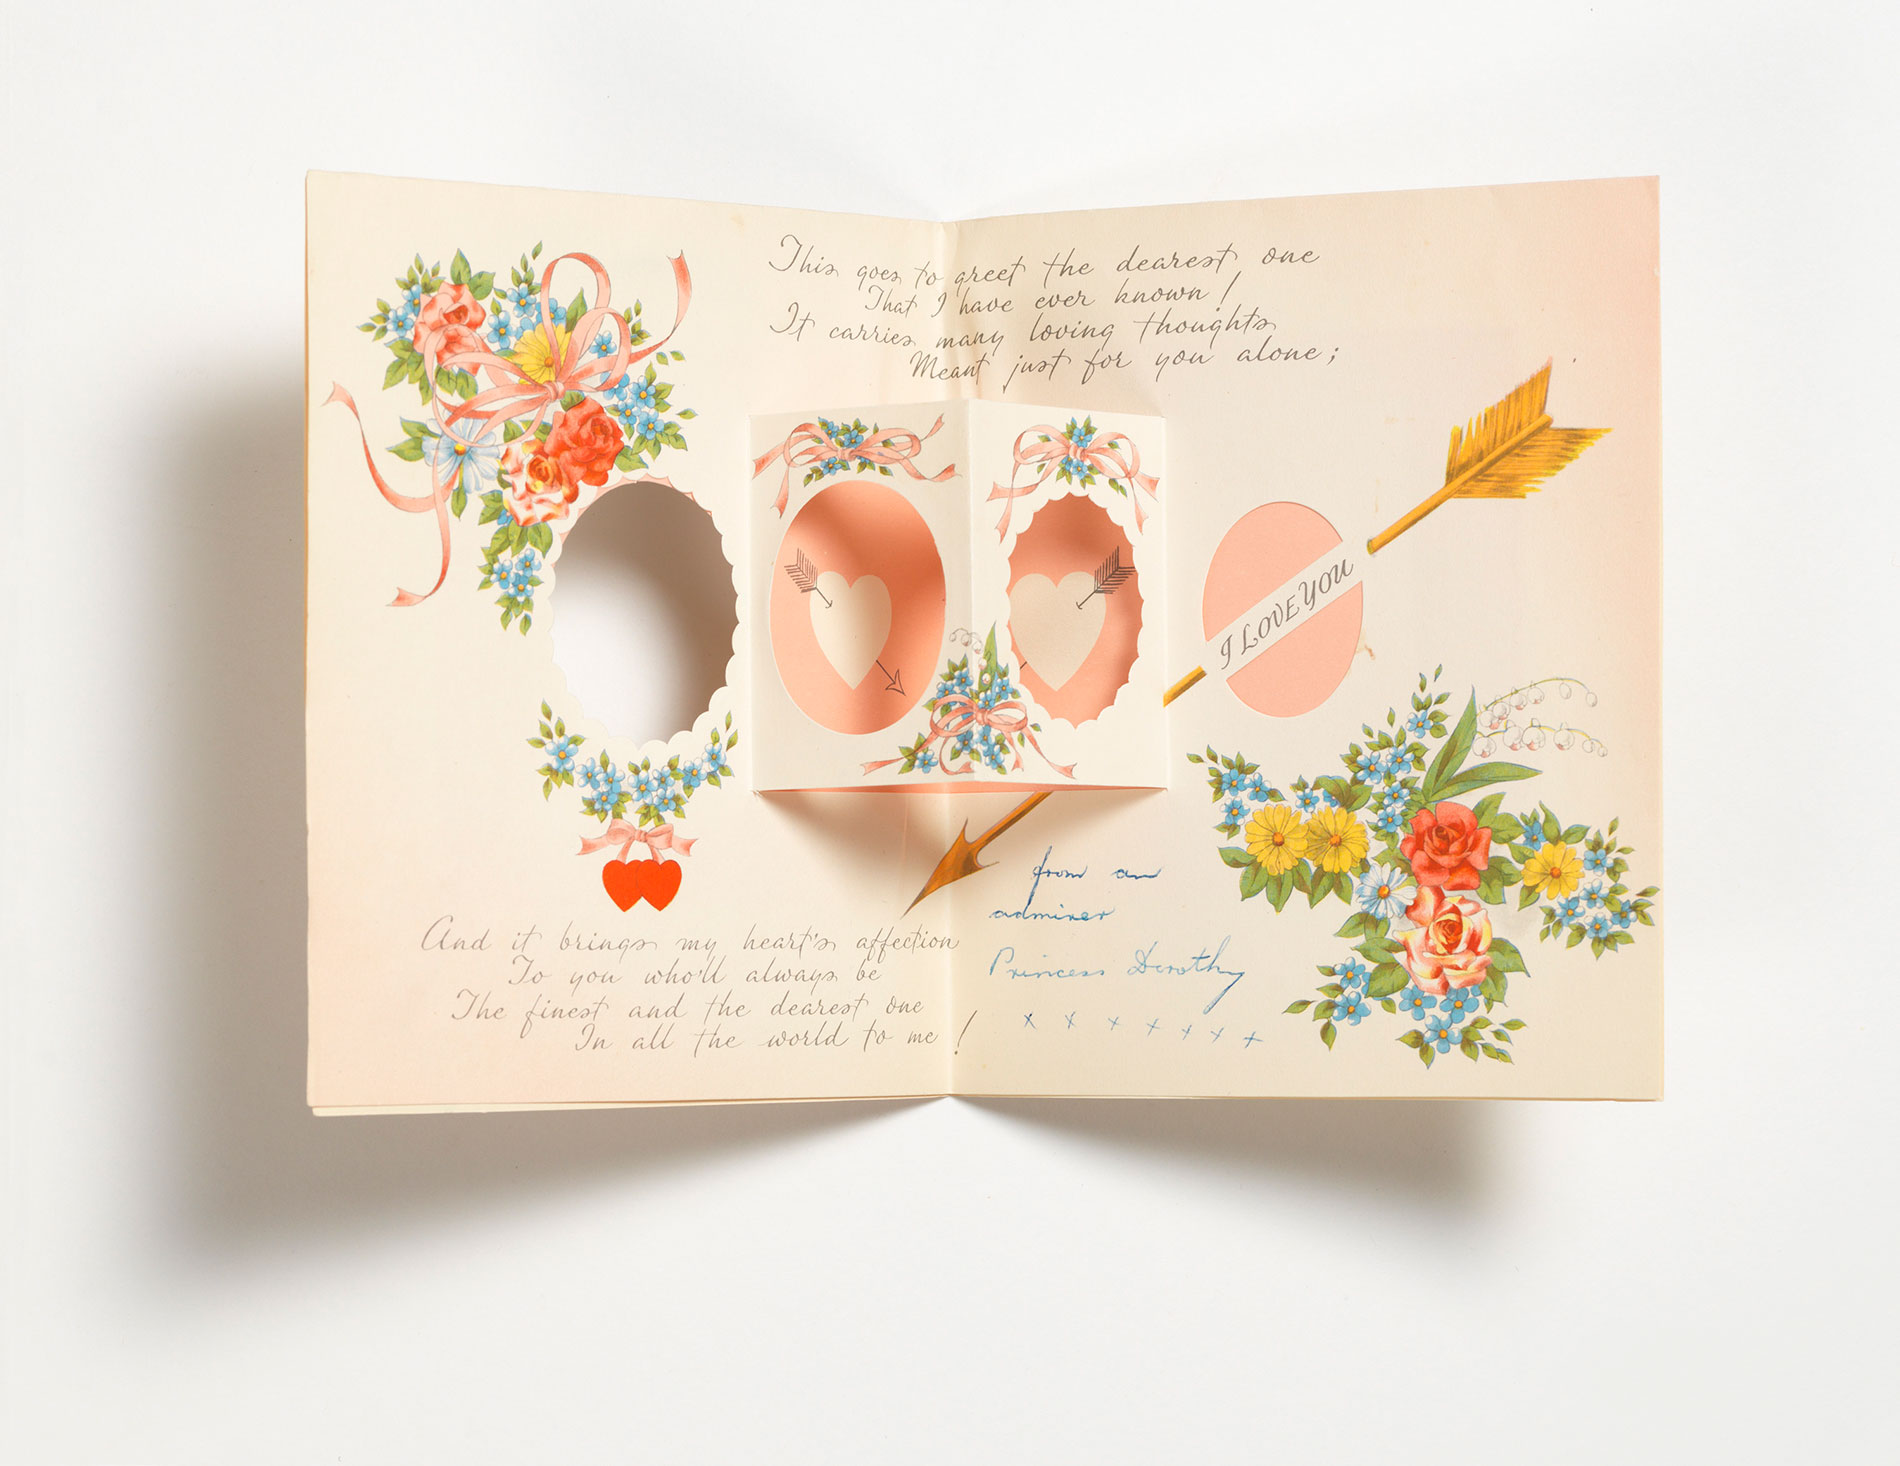 The inside of a Valentine's Day greeting card, with a pop-up feature, a printed romantic message and flower graphics.